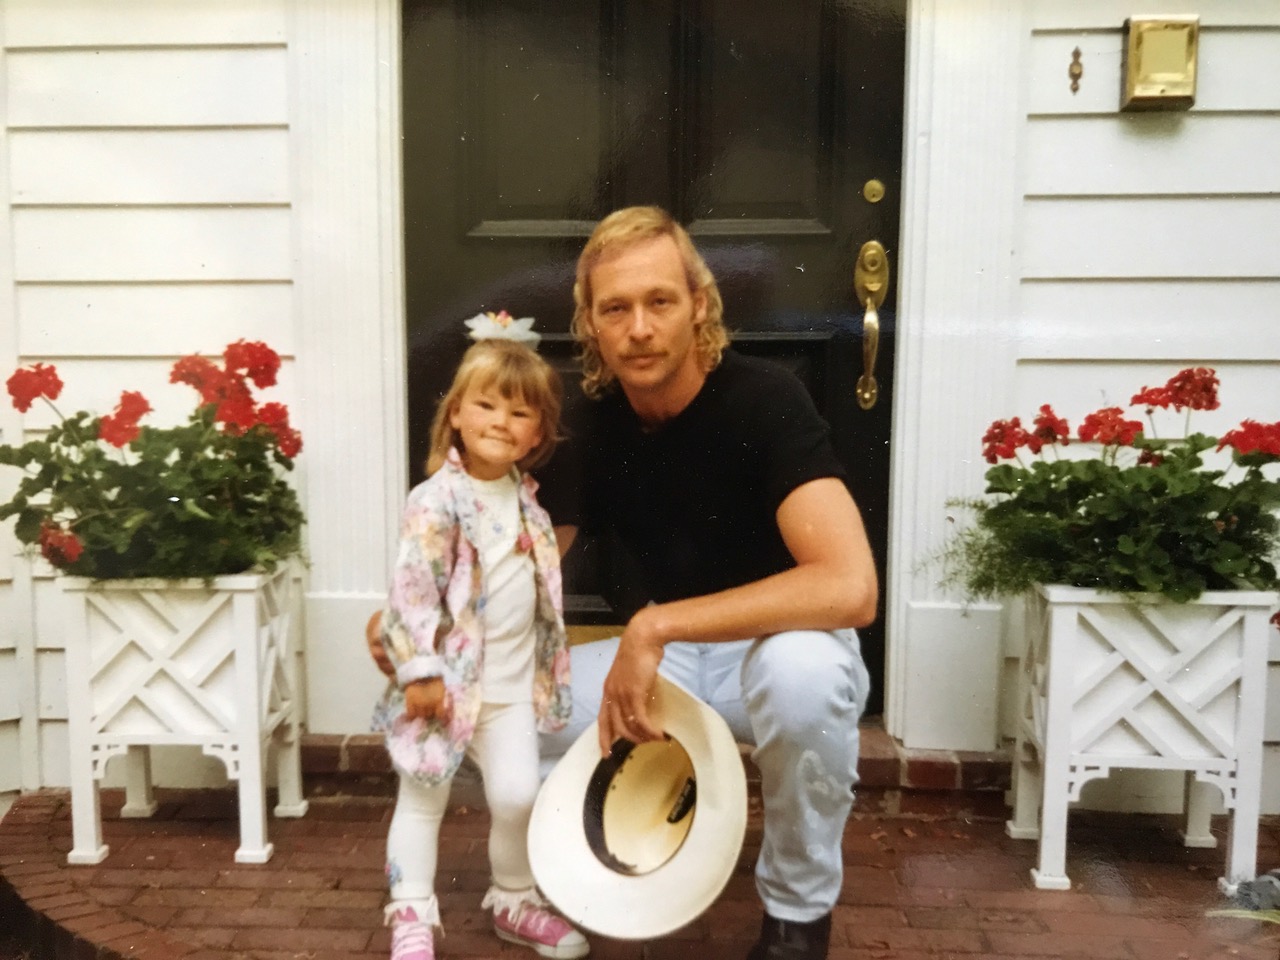 <p>Country music star Alan Jackson -- who has three girls with his wife, high school sweetheart Denise -- is seen here in the early '90s posing on the porch with their eldest, Mattie, when she was an adorable toddler. Keep reading to see the author all grown up...</p>